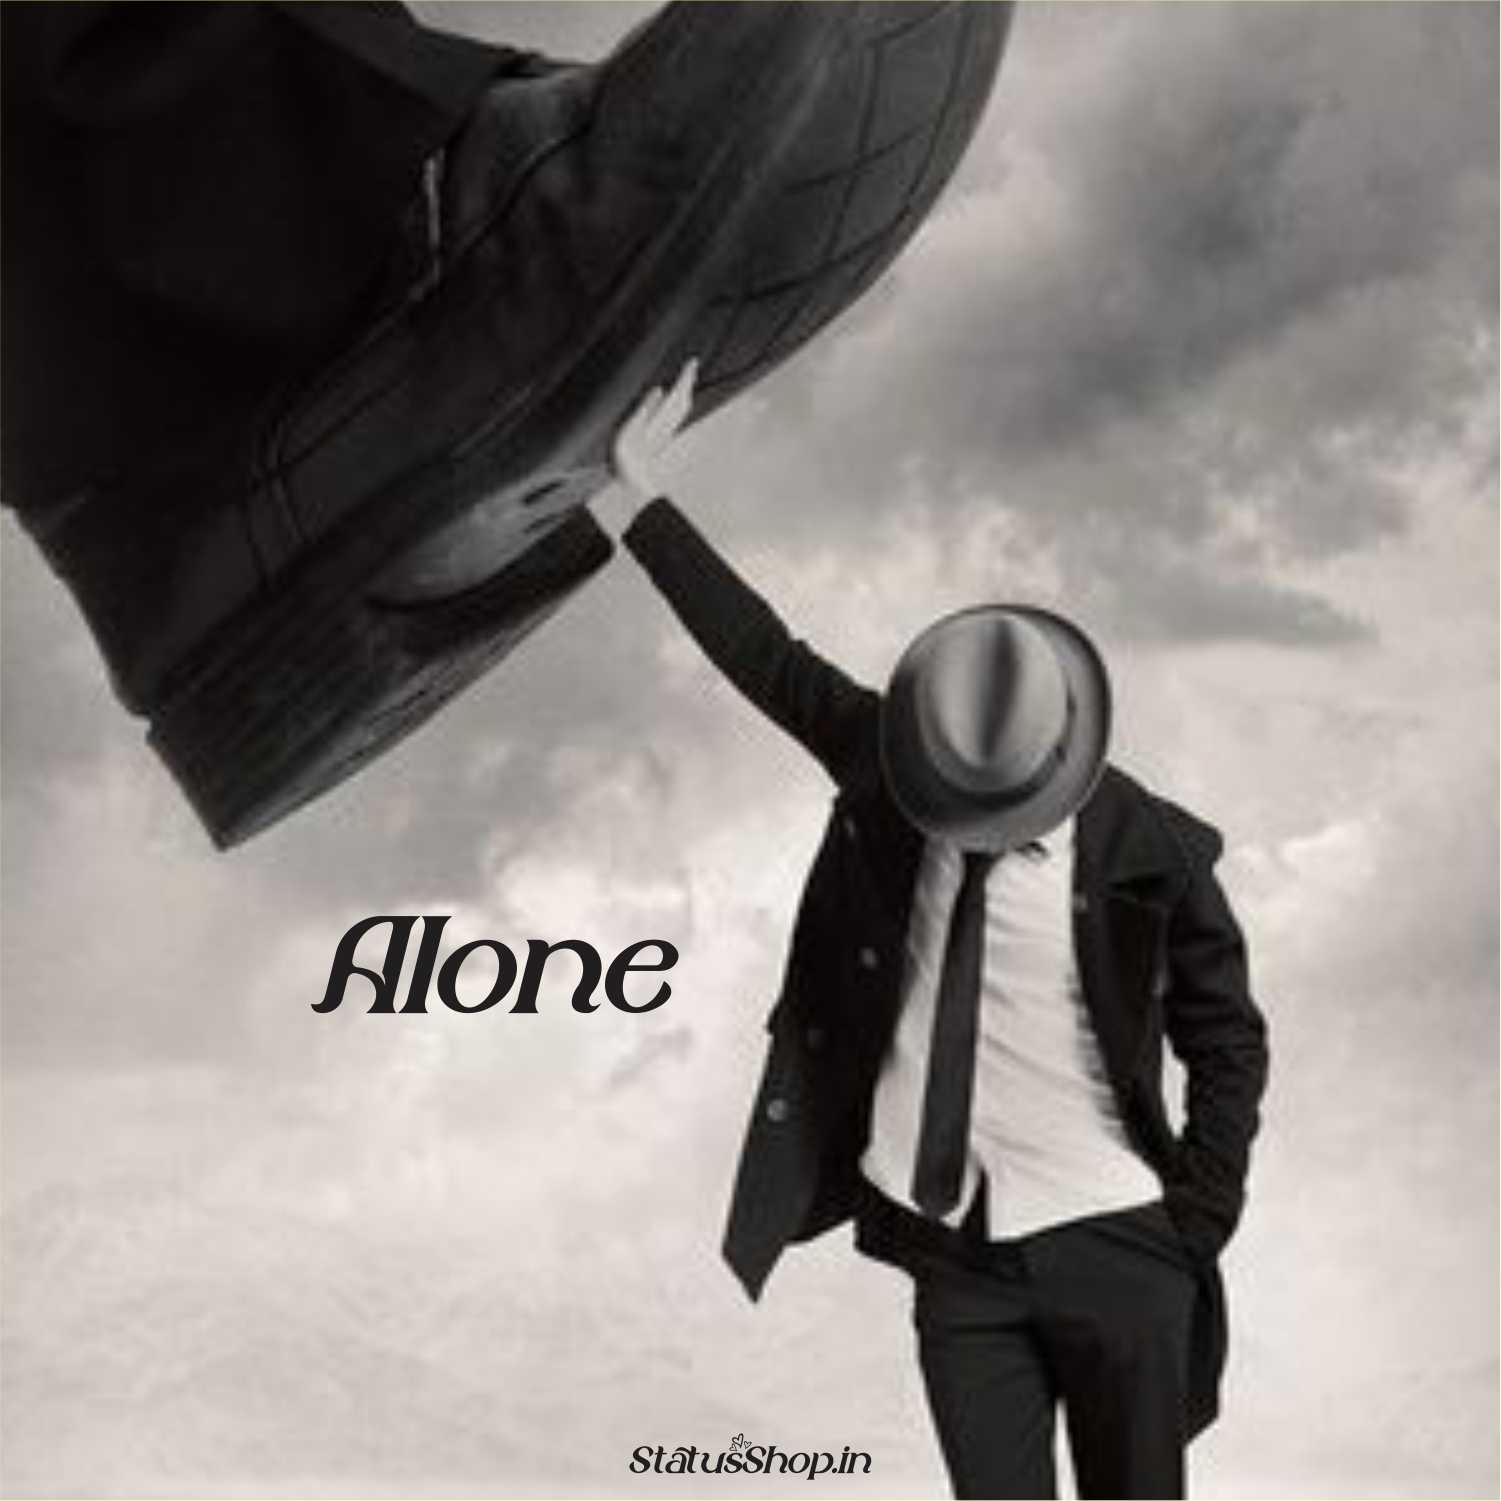 Alone-Images